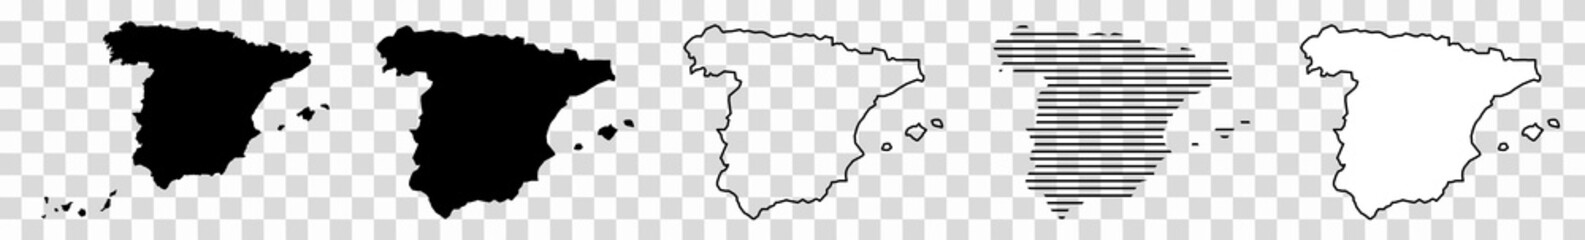 Spain Map Black | Spanish Border | State Country | Transparent Isolated | Variations